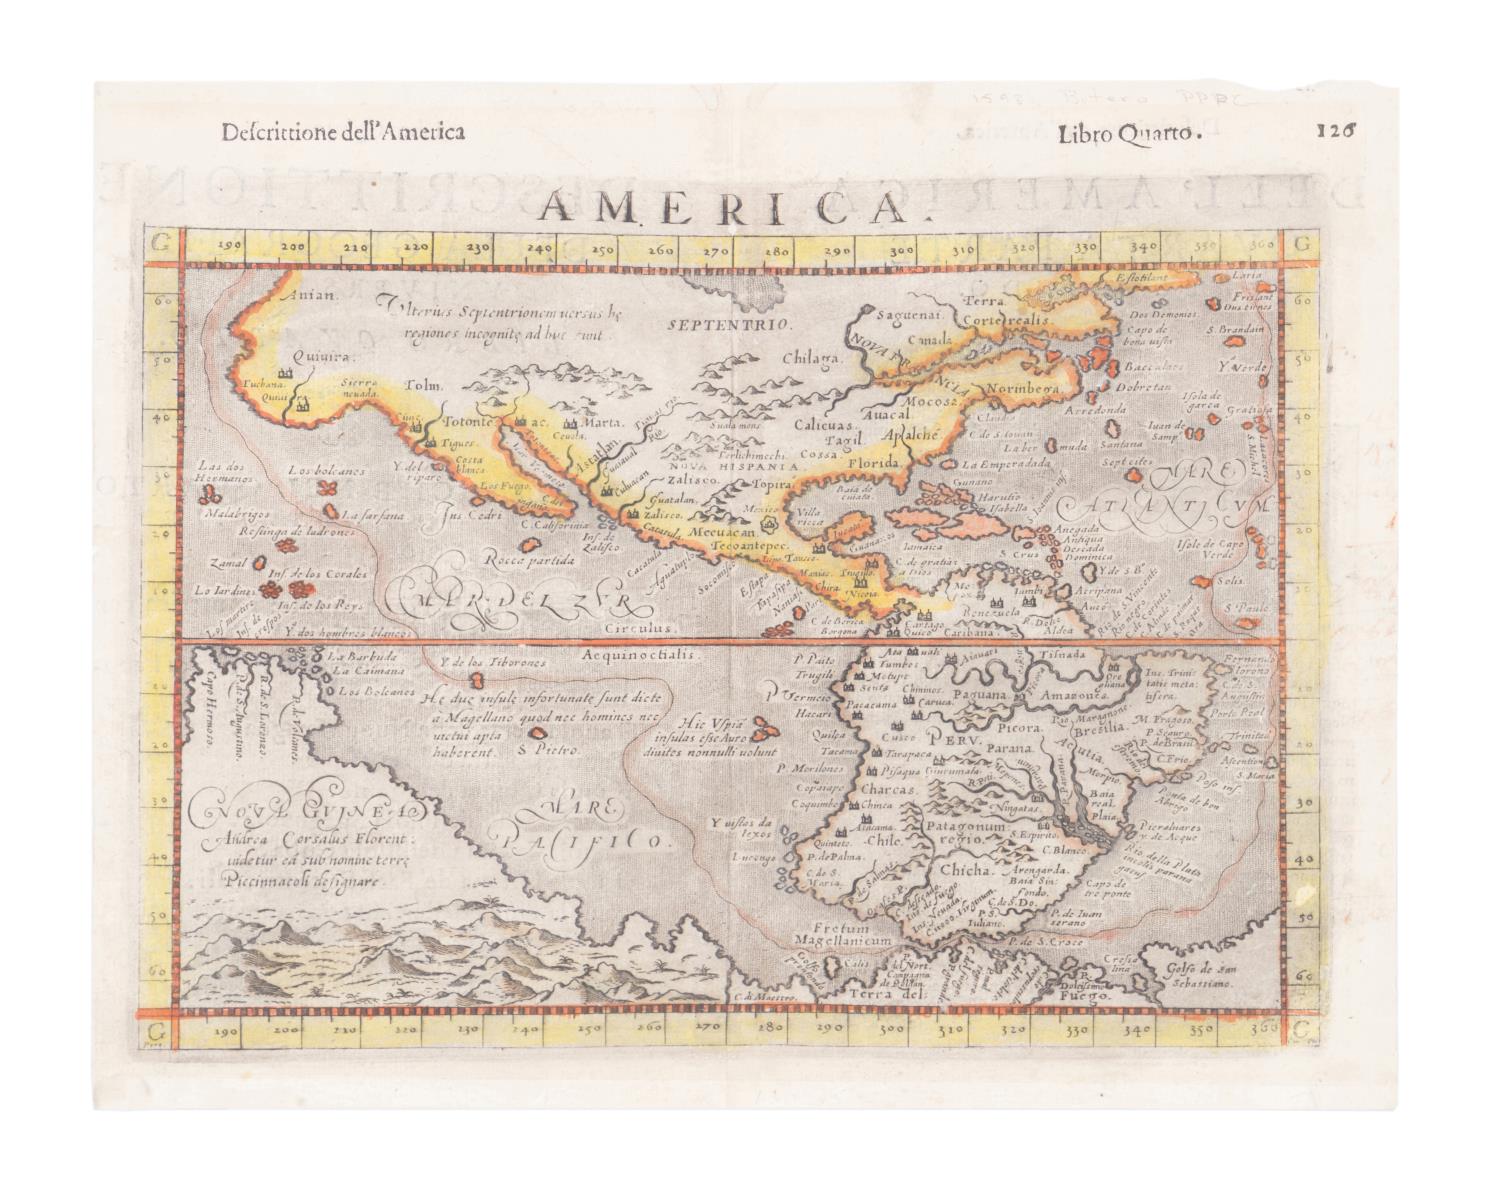 GIOVANNI BOTERO ENGRAVED MAP AMERICA  2f9d1d